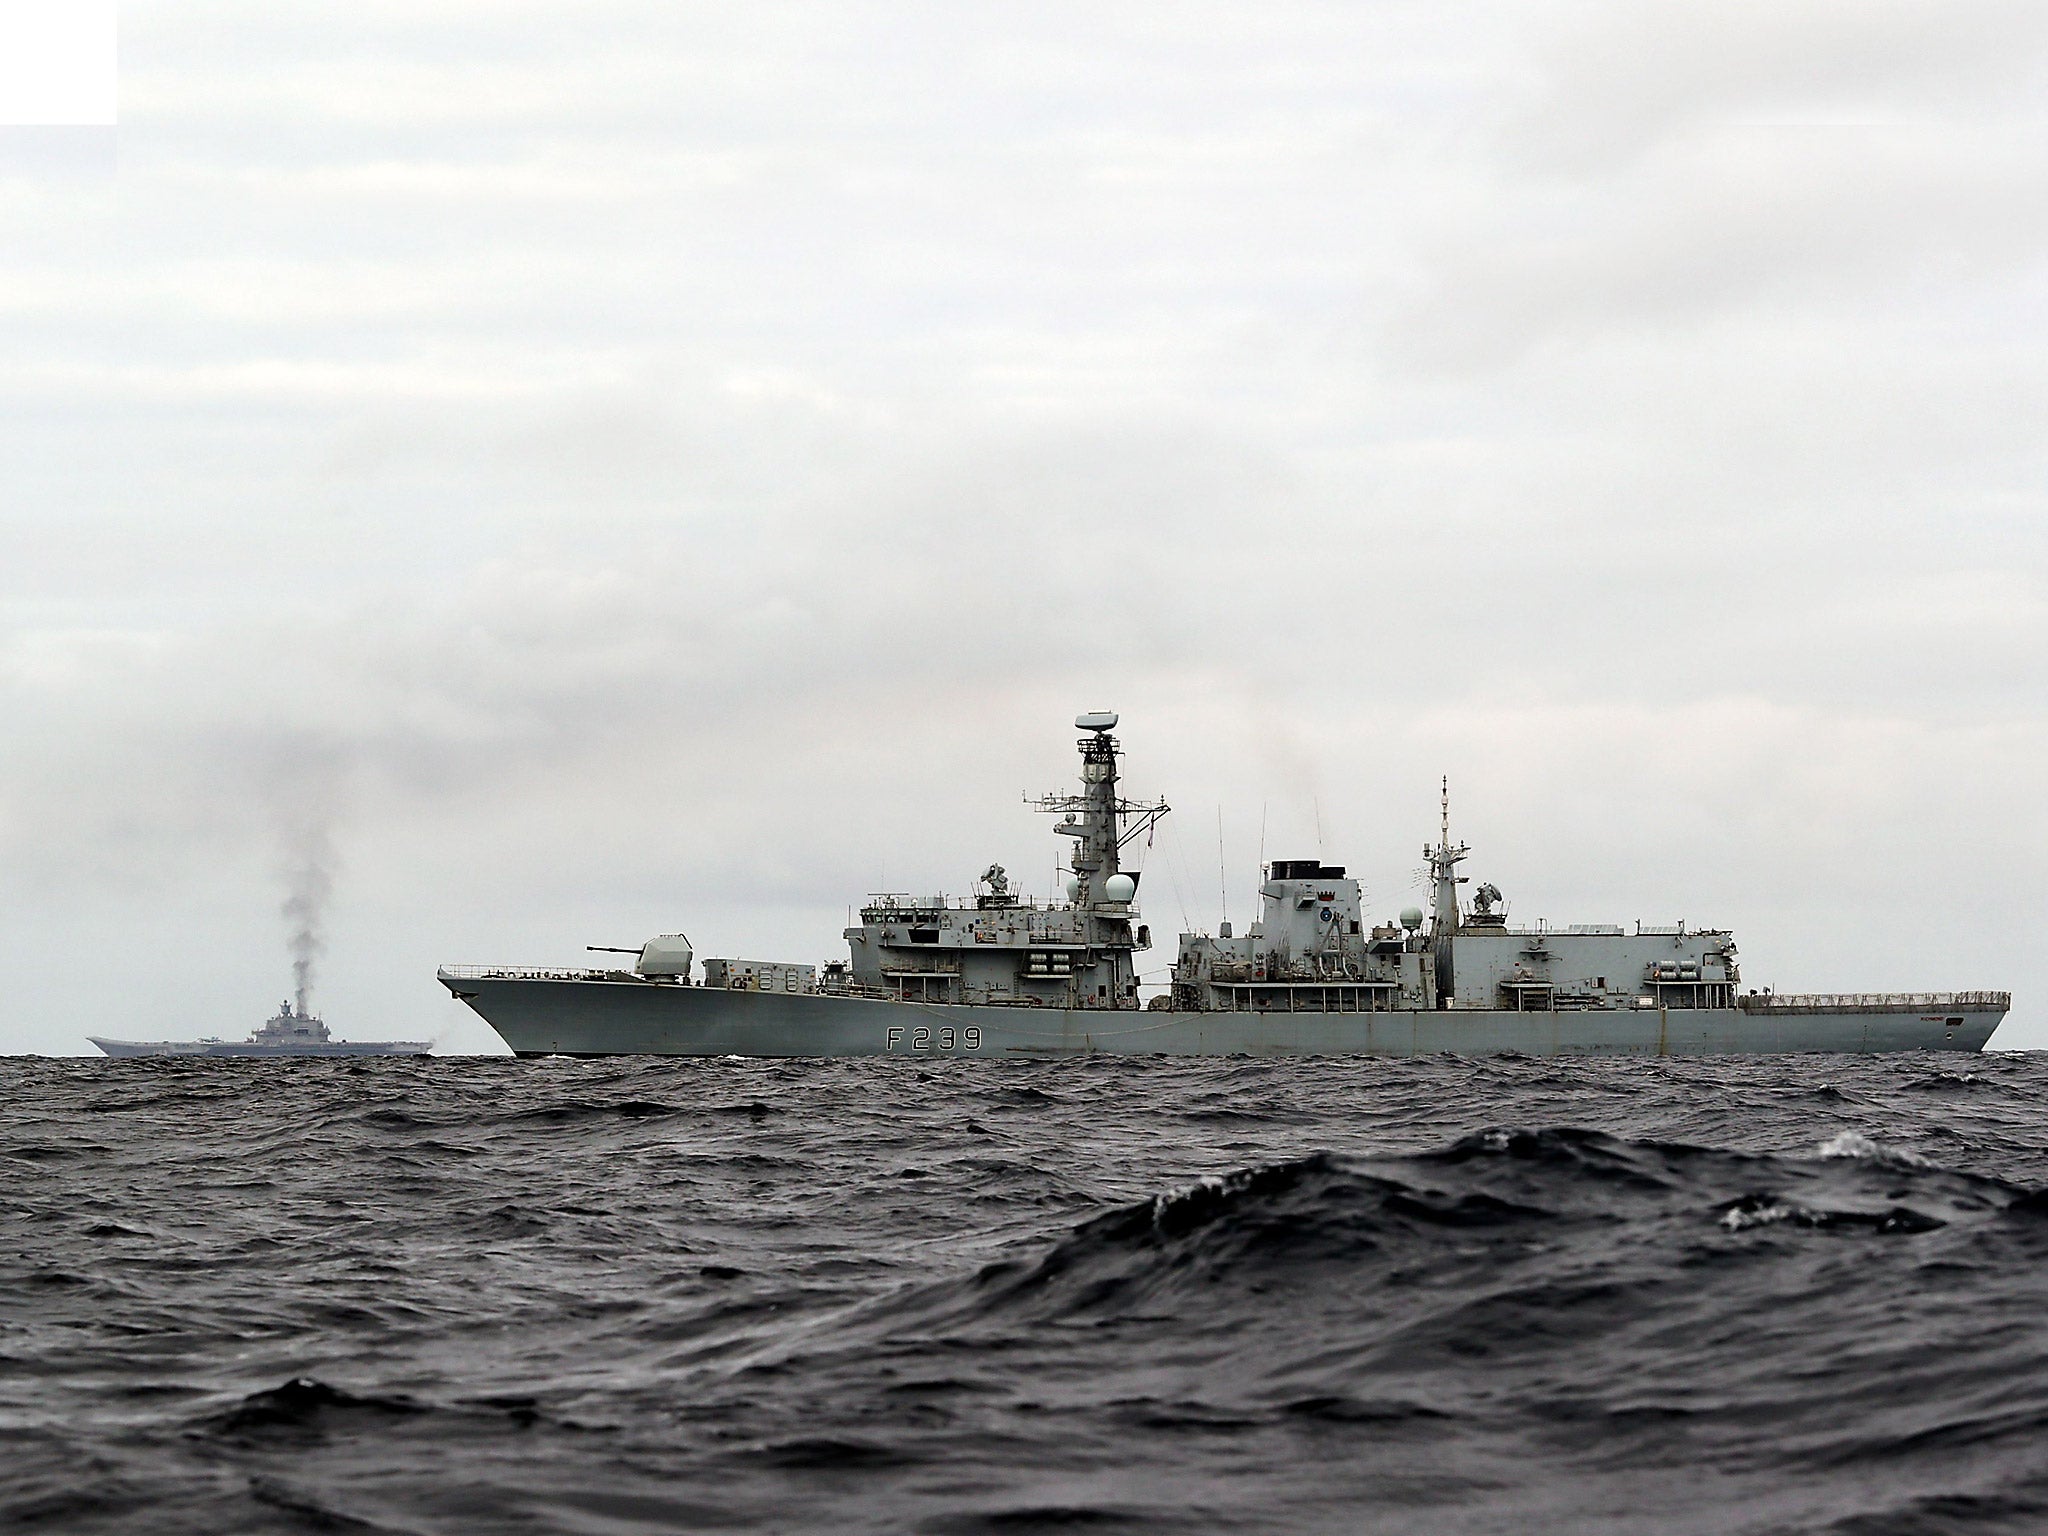 File photo. HMS Richmond (front), a Type 23 Duke Class frigate, observing aircraft carrier, which is part of a Russian task group, during transit through the North Sea